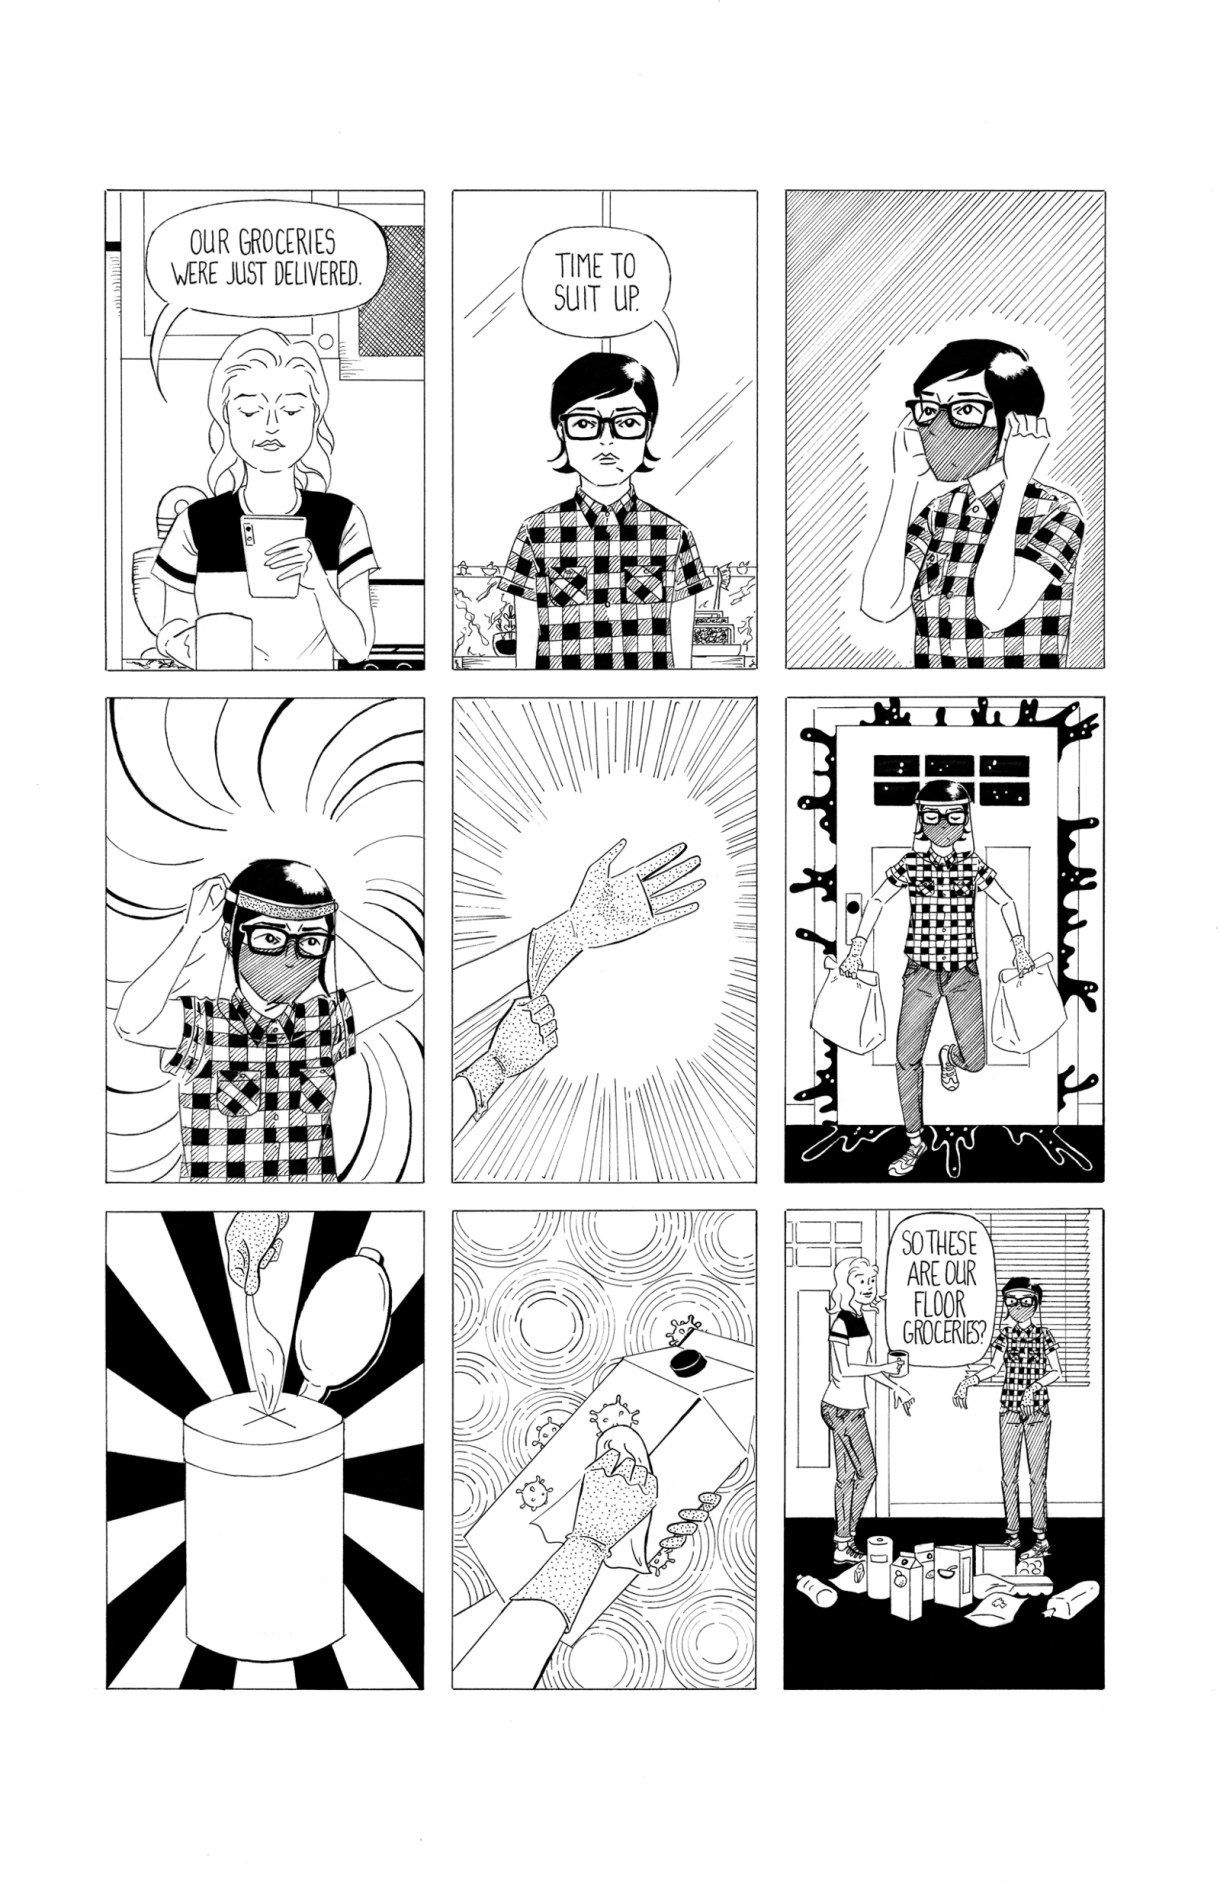 In a nine-panel black and white comic, Frida's girlfriend looks down at her phone and informs Frida that the groceries have been delivered. Friday masks up to get the groceries from the front door. She puts on gloves and grabs the disinfectant wipes. Bravely she takes all the groceries and wipes them down with the wipes, one by one. The camera zooms out in the last panel, showing all the disinfected groceries laying on the floor as Frida moves on to the next one. Her girlfriend asks, "are these our floor groceries now?"